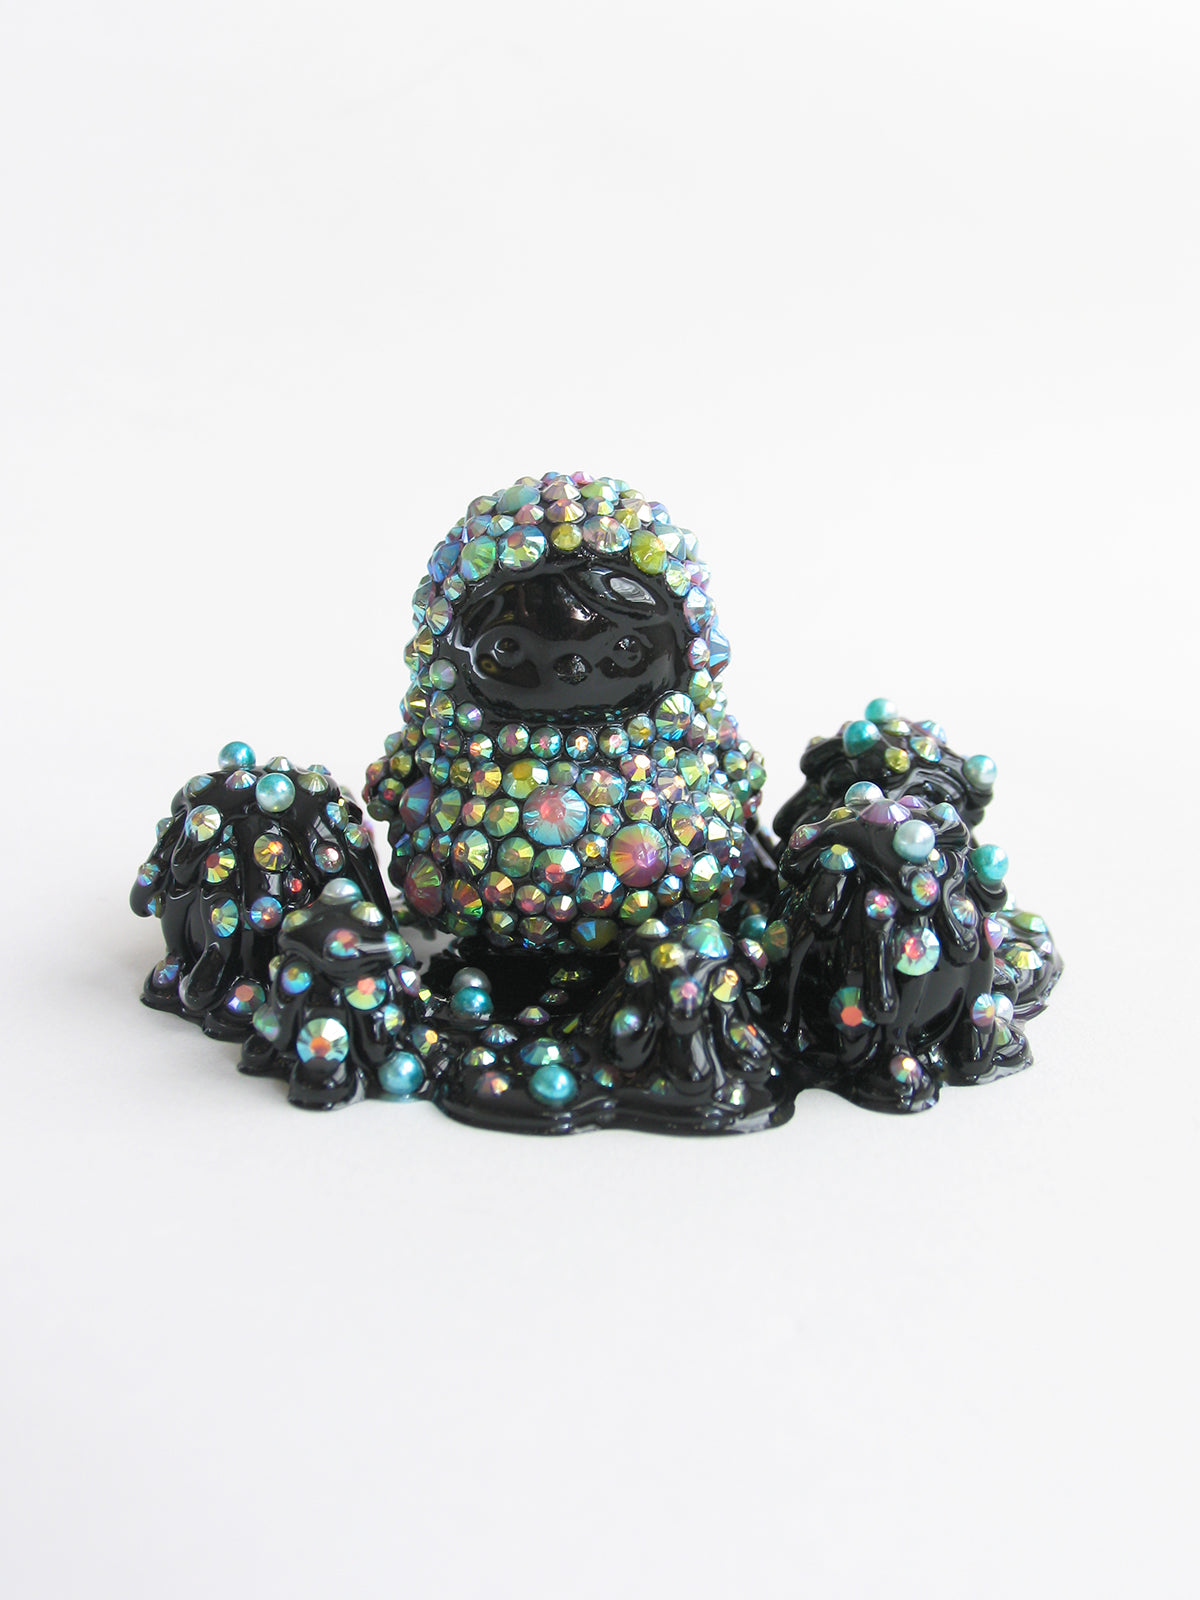 A black statue adorned with colorful crystals, beads, and jewelry, measuring 2 x 3 3/4 x 2 1/2.